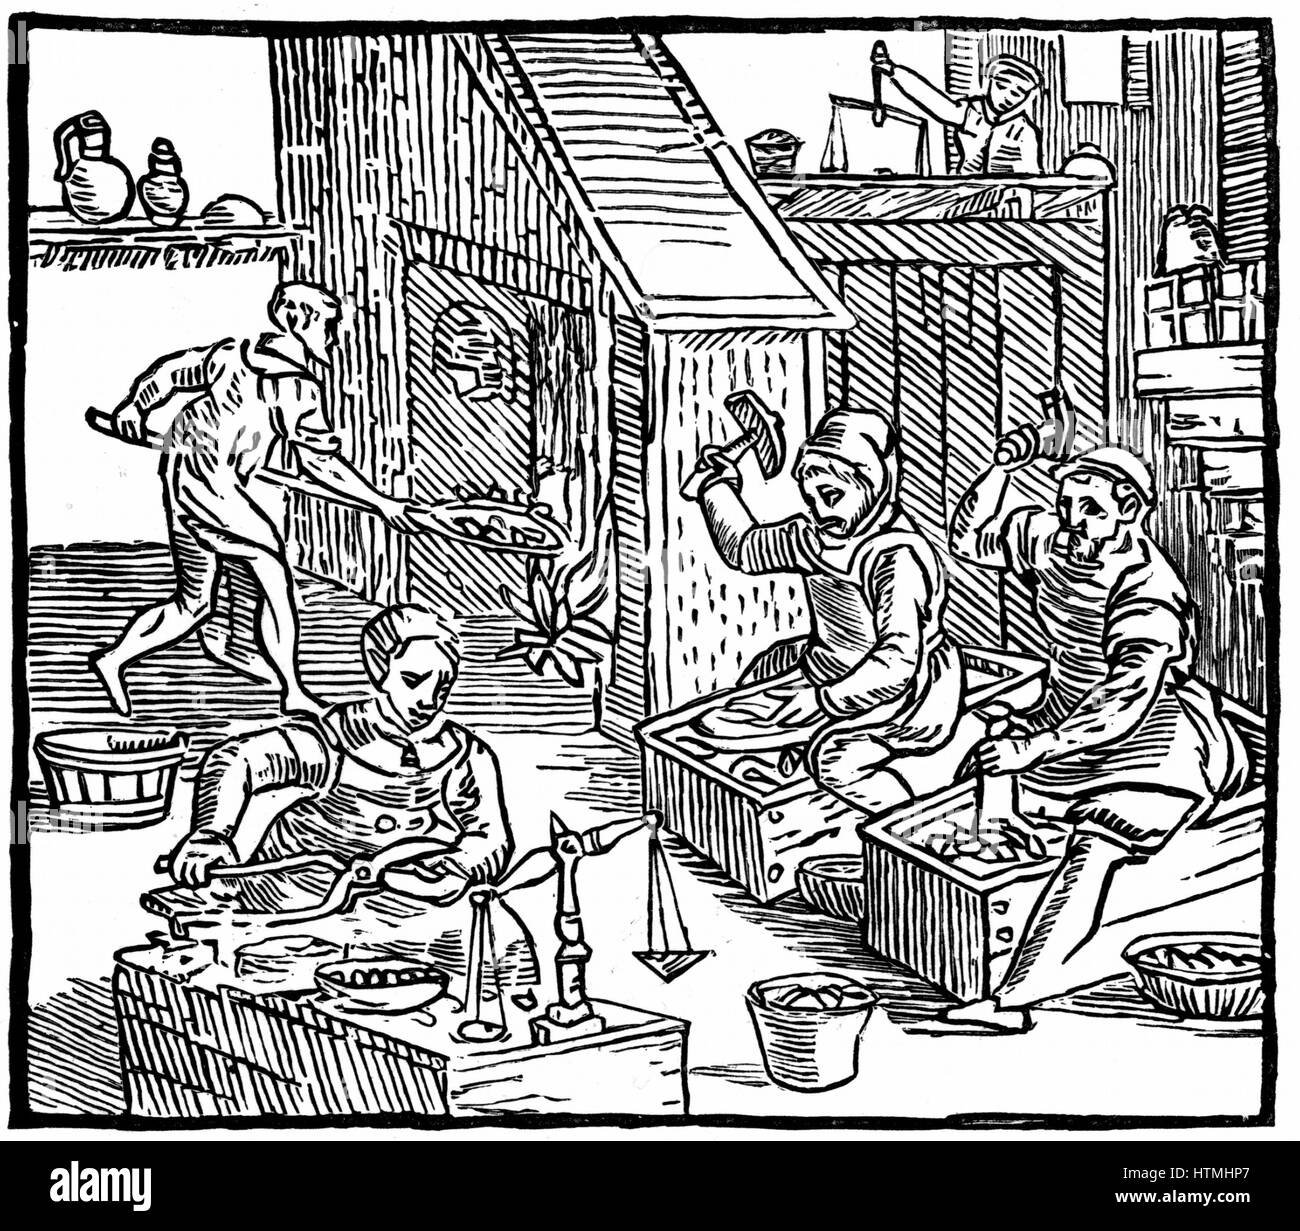 Coiners at work: Interior of a mint showing coins being stamped out and weighed to see they contain correct amount of metal. From Ralph Holinshead 'Chronicles of England, Scotlande and Irelande' 1577. Debasement of coinage by clipping was a problem until Stock Photo